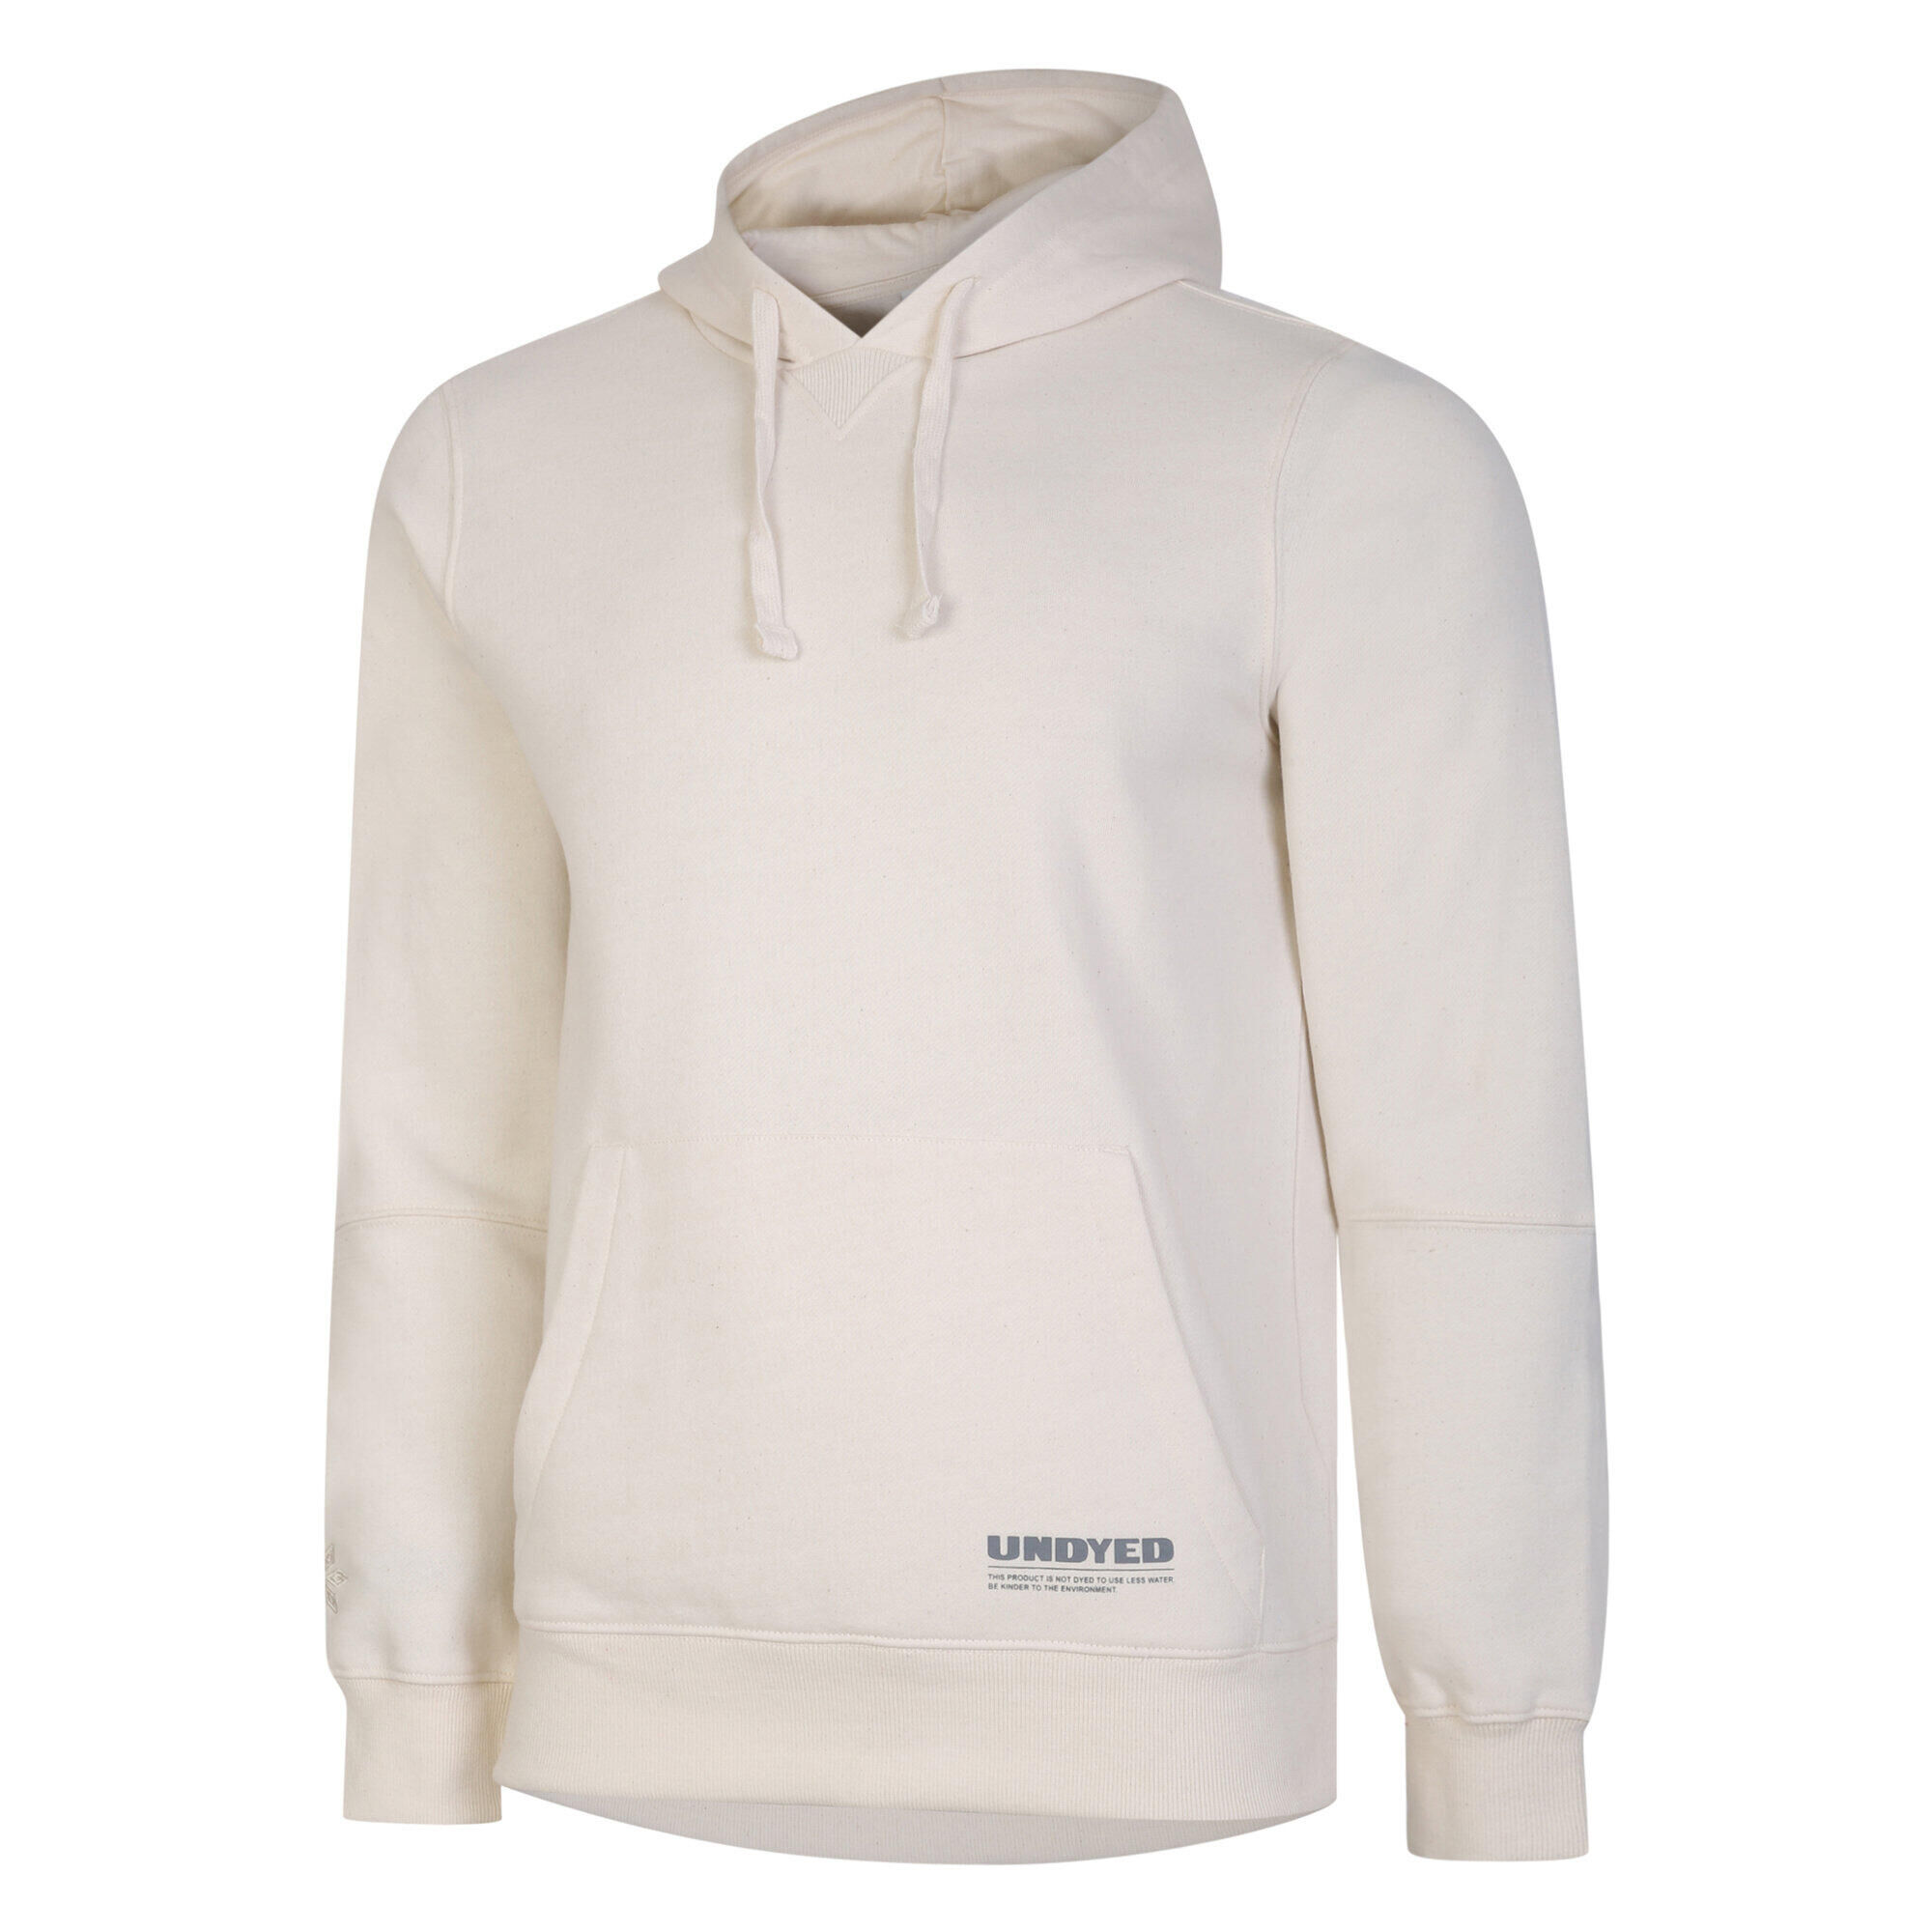 UMBRO Mens Undyed Undyed Hoodie (Natural)